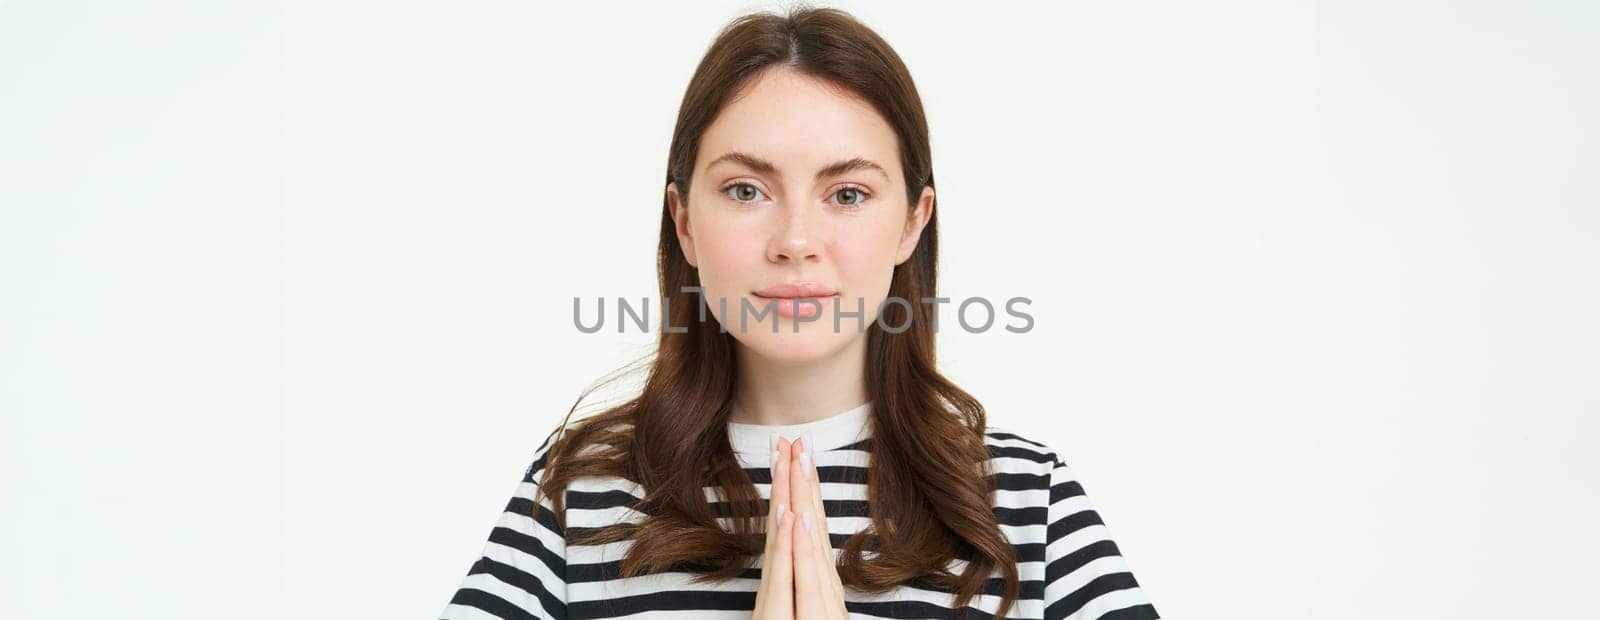 Portrait of young woman expresses her gratitude, shows thank you, namaste gesture, holding hands clasped together near chest and smiling, standing over white background.